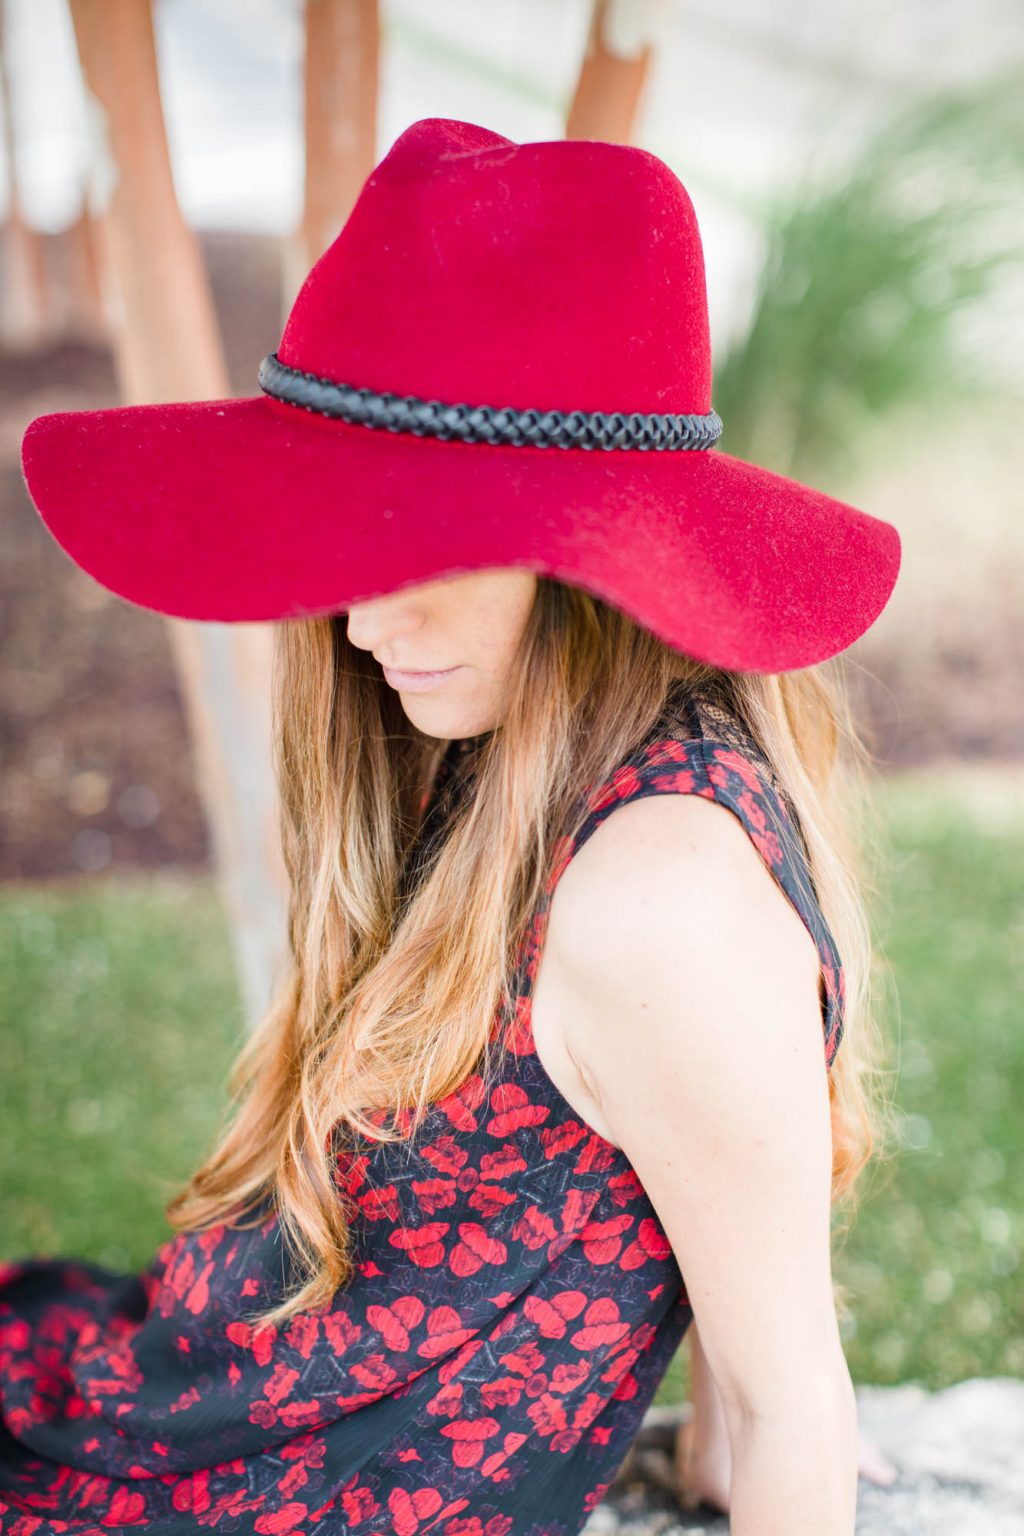 summer to fall transition outfit ideas, how to dress in between seasons, alice + olivia AMIRAH ALINE DRESS, red wide brim fedora, red and black outfit, early fall outfit ideas, late summer outfit ideas